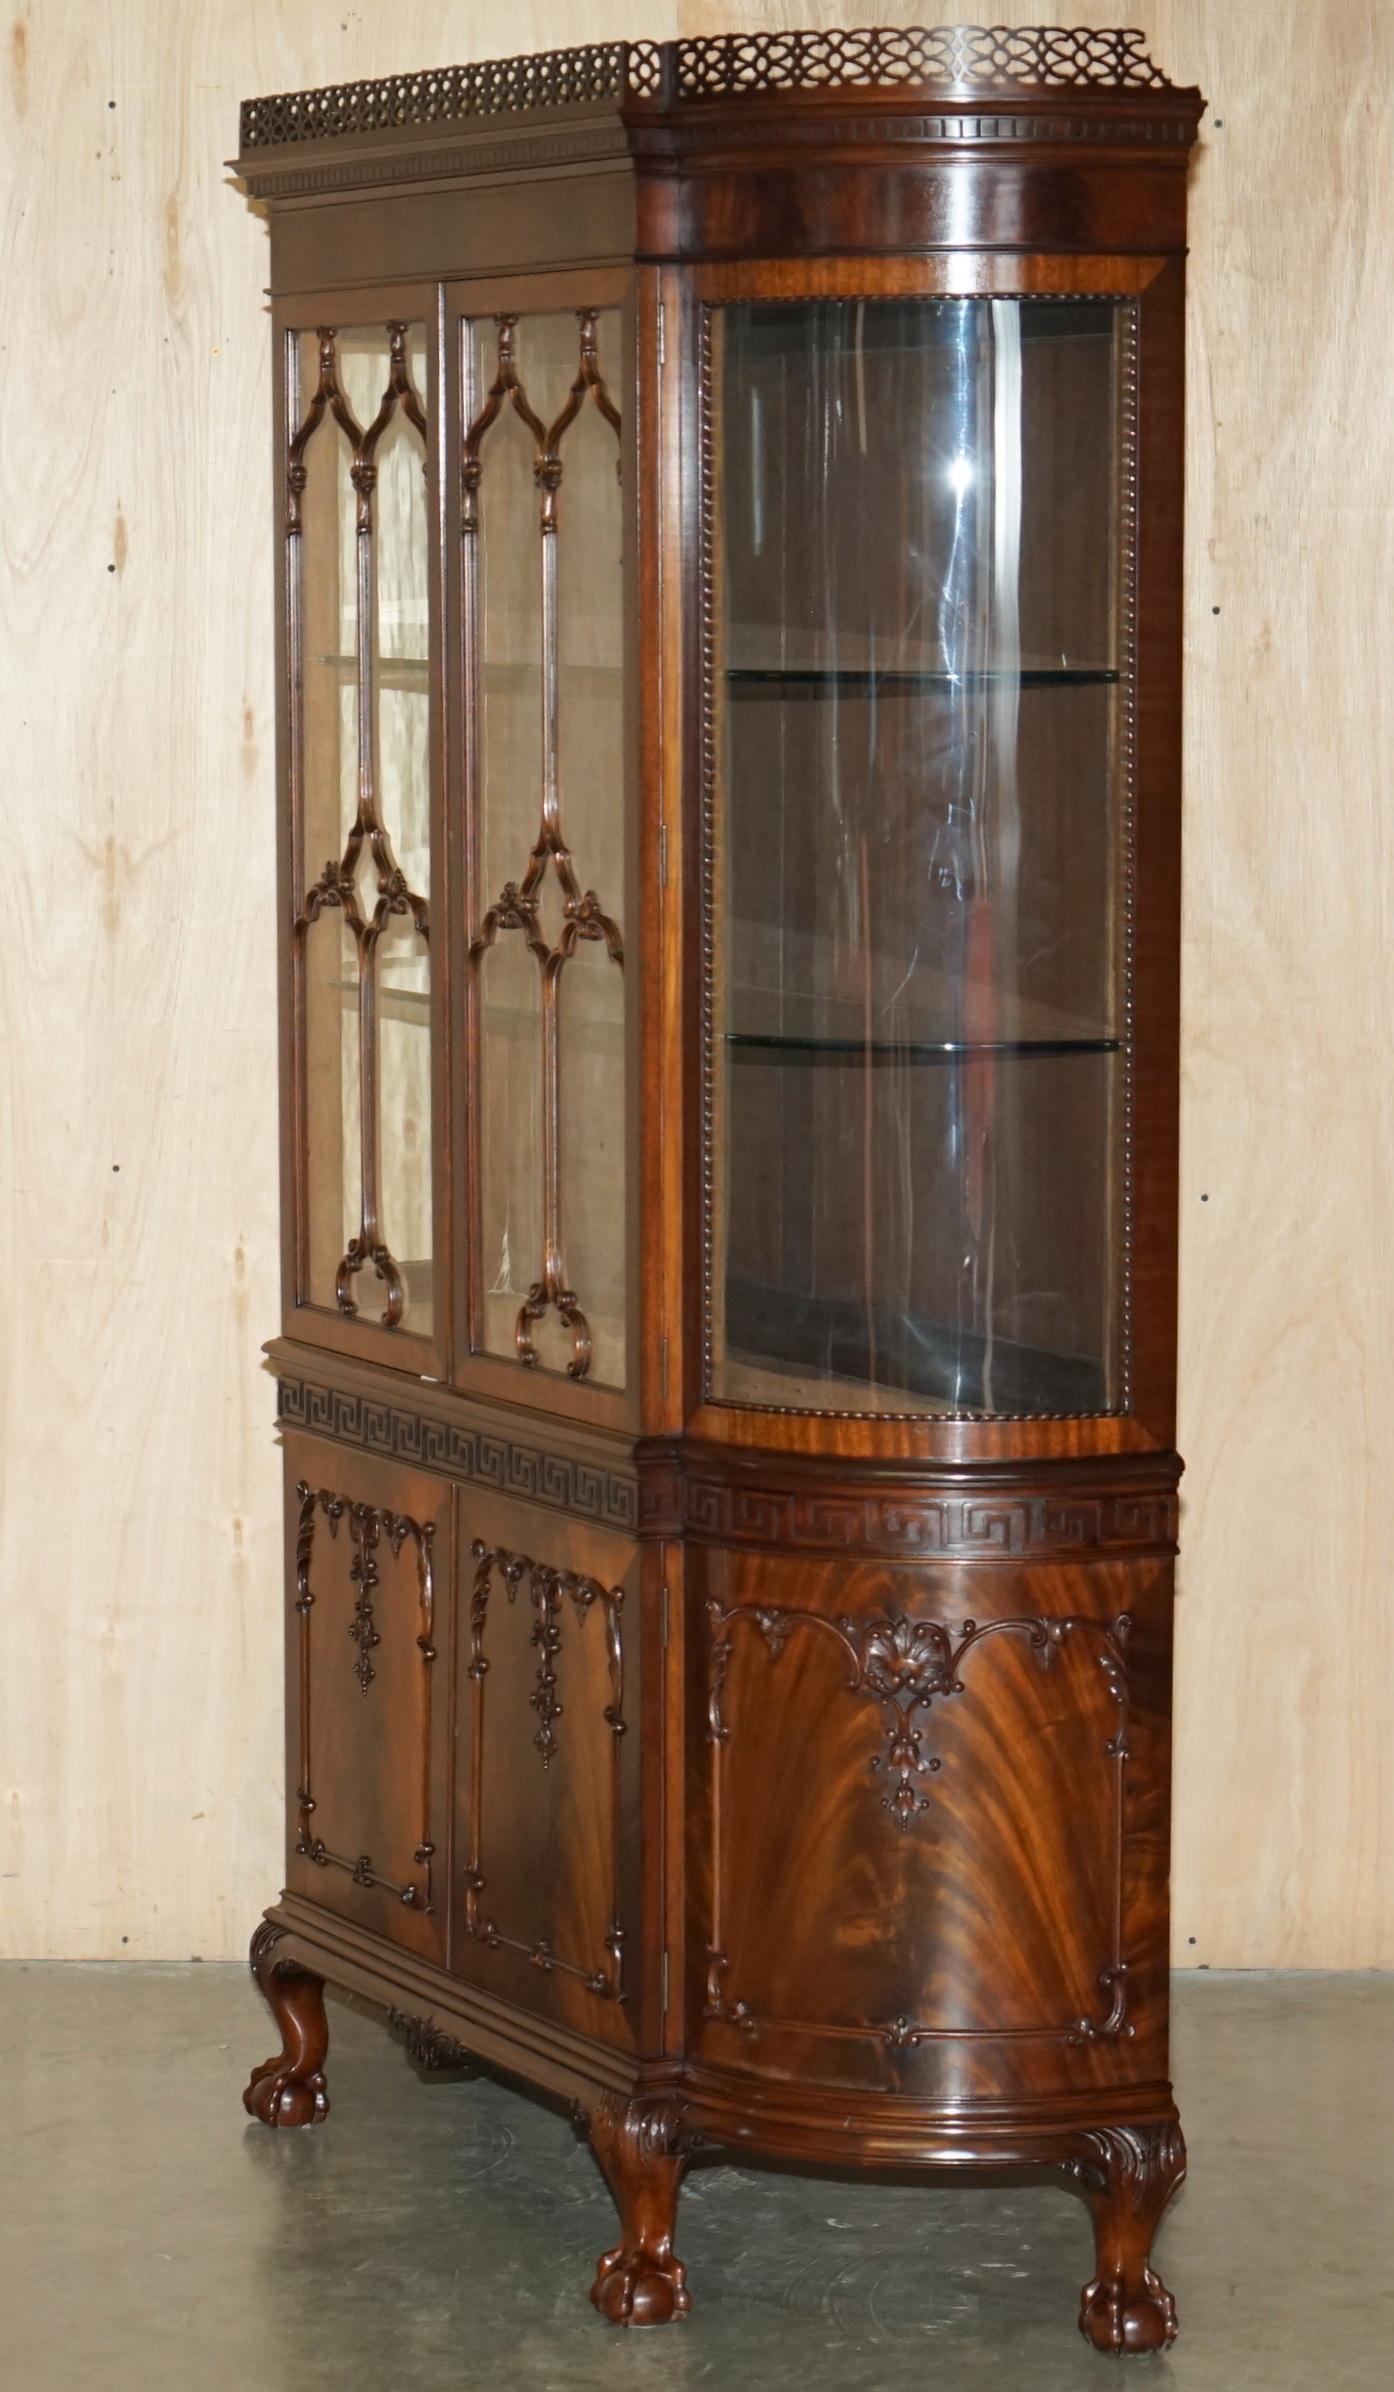 EXQUISITÉ CHARLES BAKER OF CHIPPENDALE HOUSE STAMPED DISPLAY CABINET en vente 8